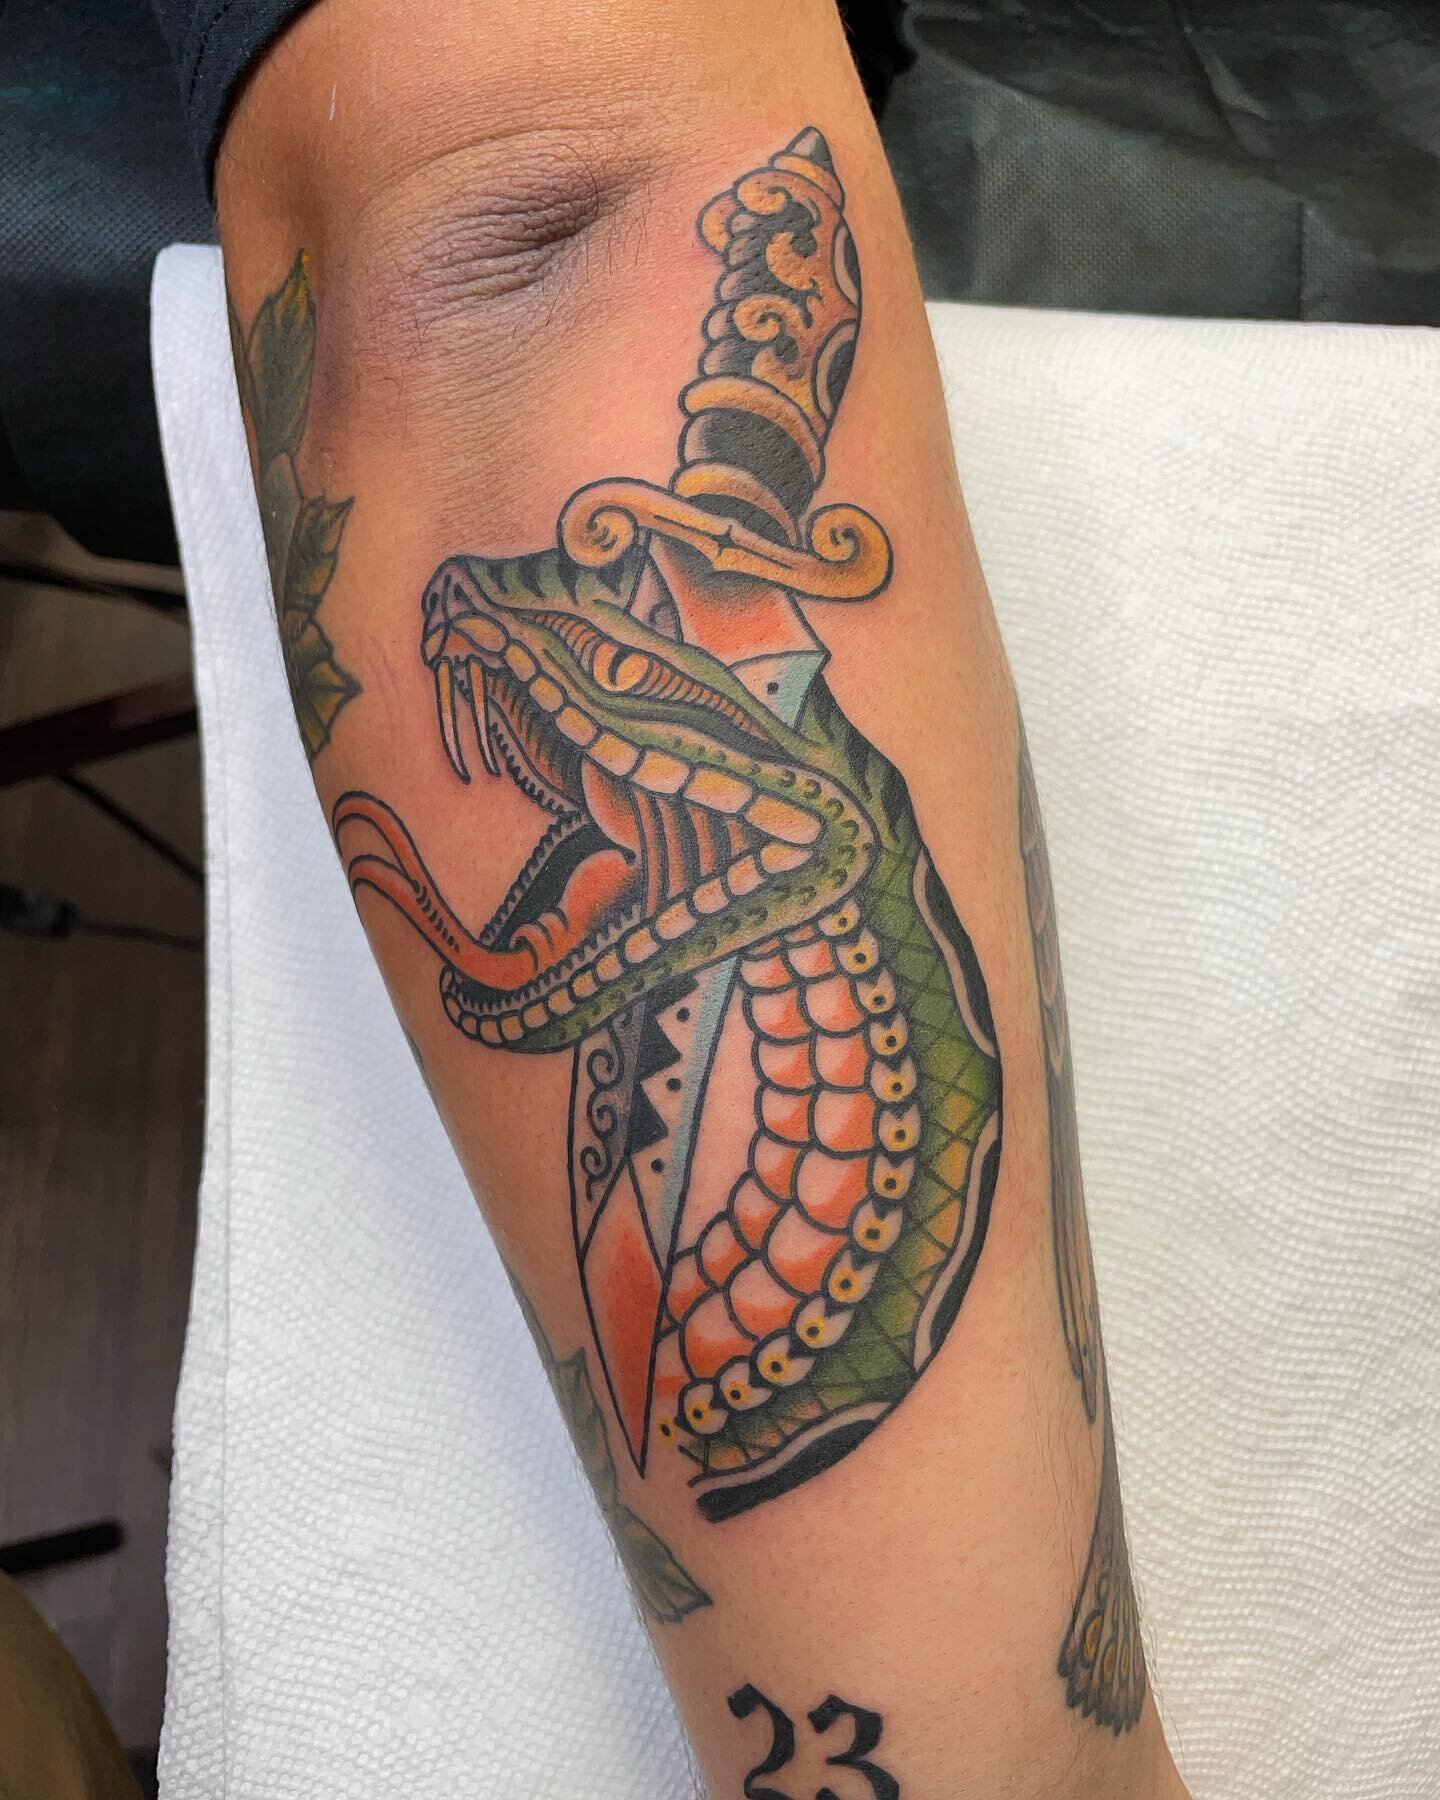 Snake made to fit, bring me the gaps and I gotchu. @0mar_sandoval 
.
Hit me up for tattooing @niall_keogh